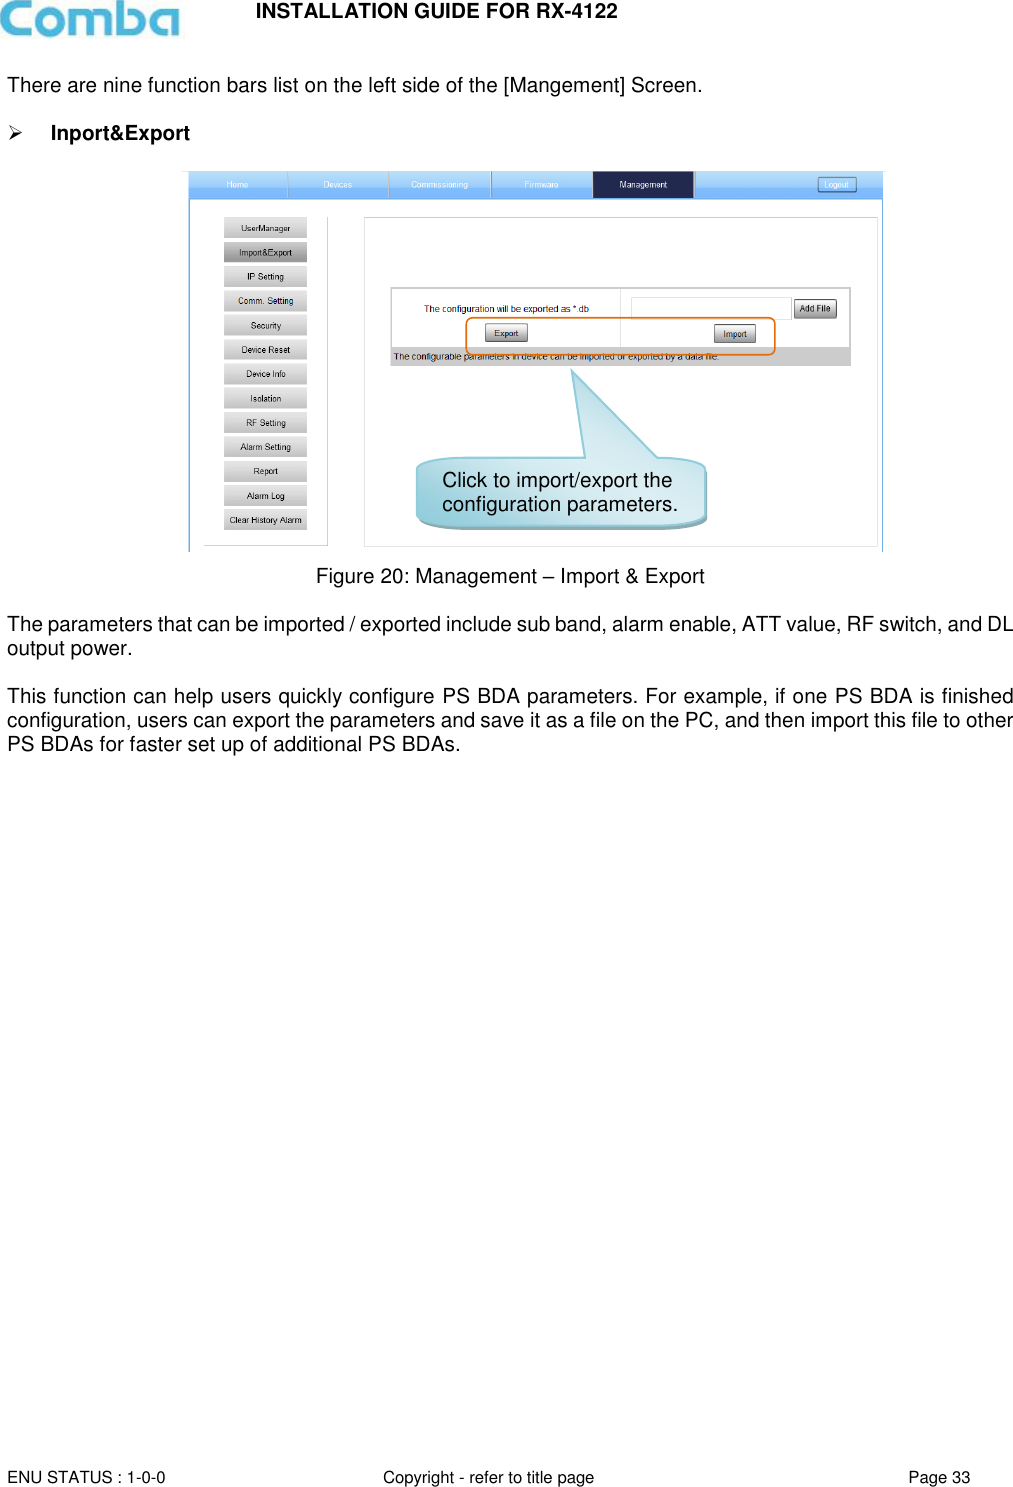 INSTALLATION GUIDE FOR RX-4122  ENU STATUS : 1-0-0 Copyright - refer to title page Page 33     There are nine function bars list on the left side of the [Mangement] Screen.    Inport&amp;Export   Figure 20: Management – Import &amp; Export  The parameters that can be imported / exported include sub band, alarm enable, ATT value, RF switch, and DL output power.  This function can help users quickly configure PS BDA parameters. For example, if one PS BDA is finished configuration, users can export the parameters and save it as a file on the PC, and then import this file to other PS BDAs for faster set up of additional PS BDAs.      Click to import/export the configuration parameters. 